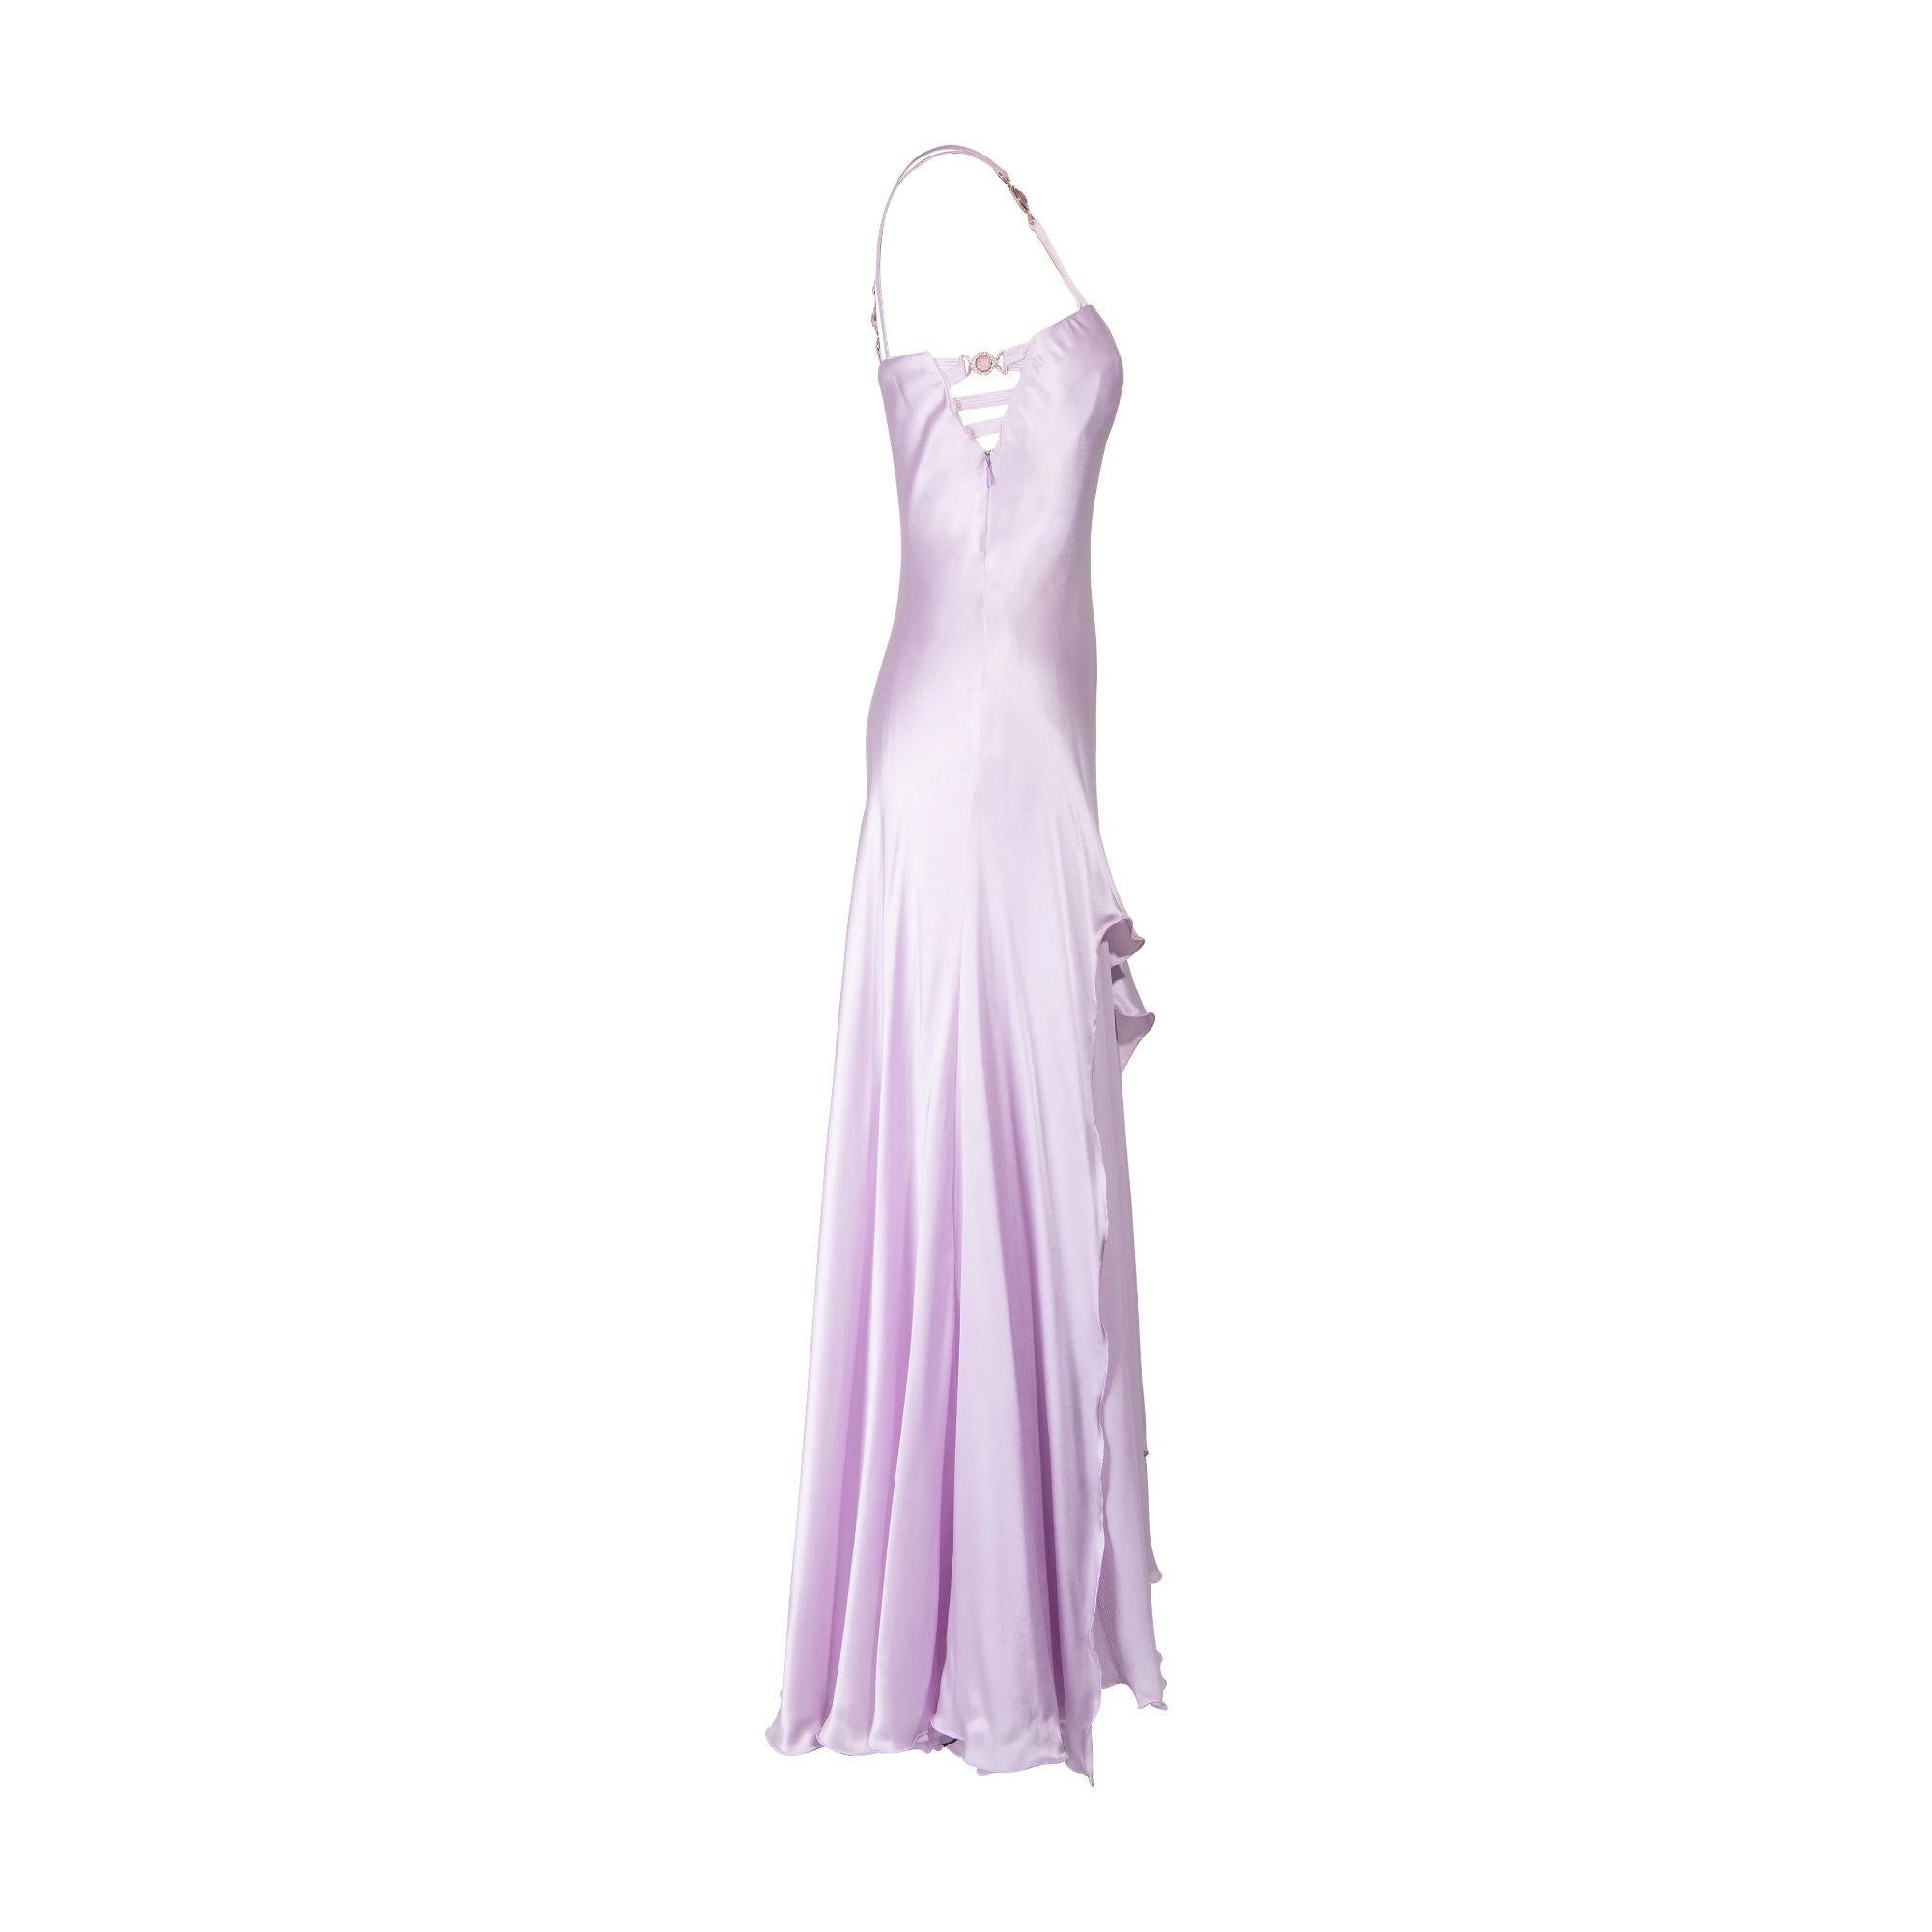 S/S 1995 Gianni Versace Purple Silk Asymmetrical Drape Gown In Good Condition In North Hollywood, CA